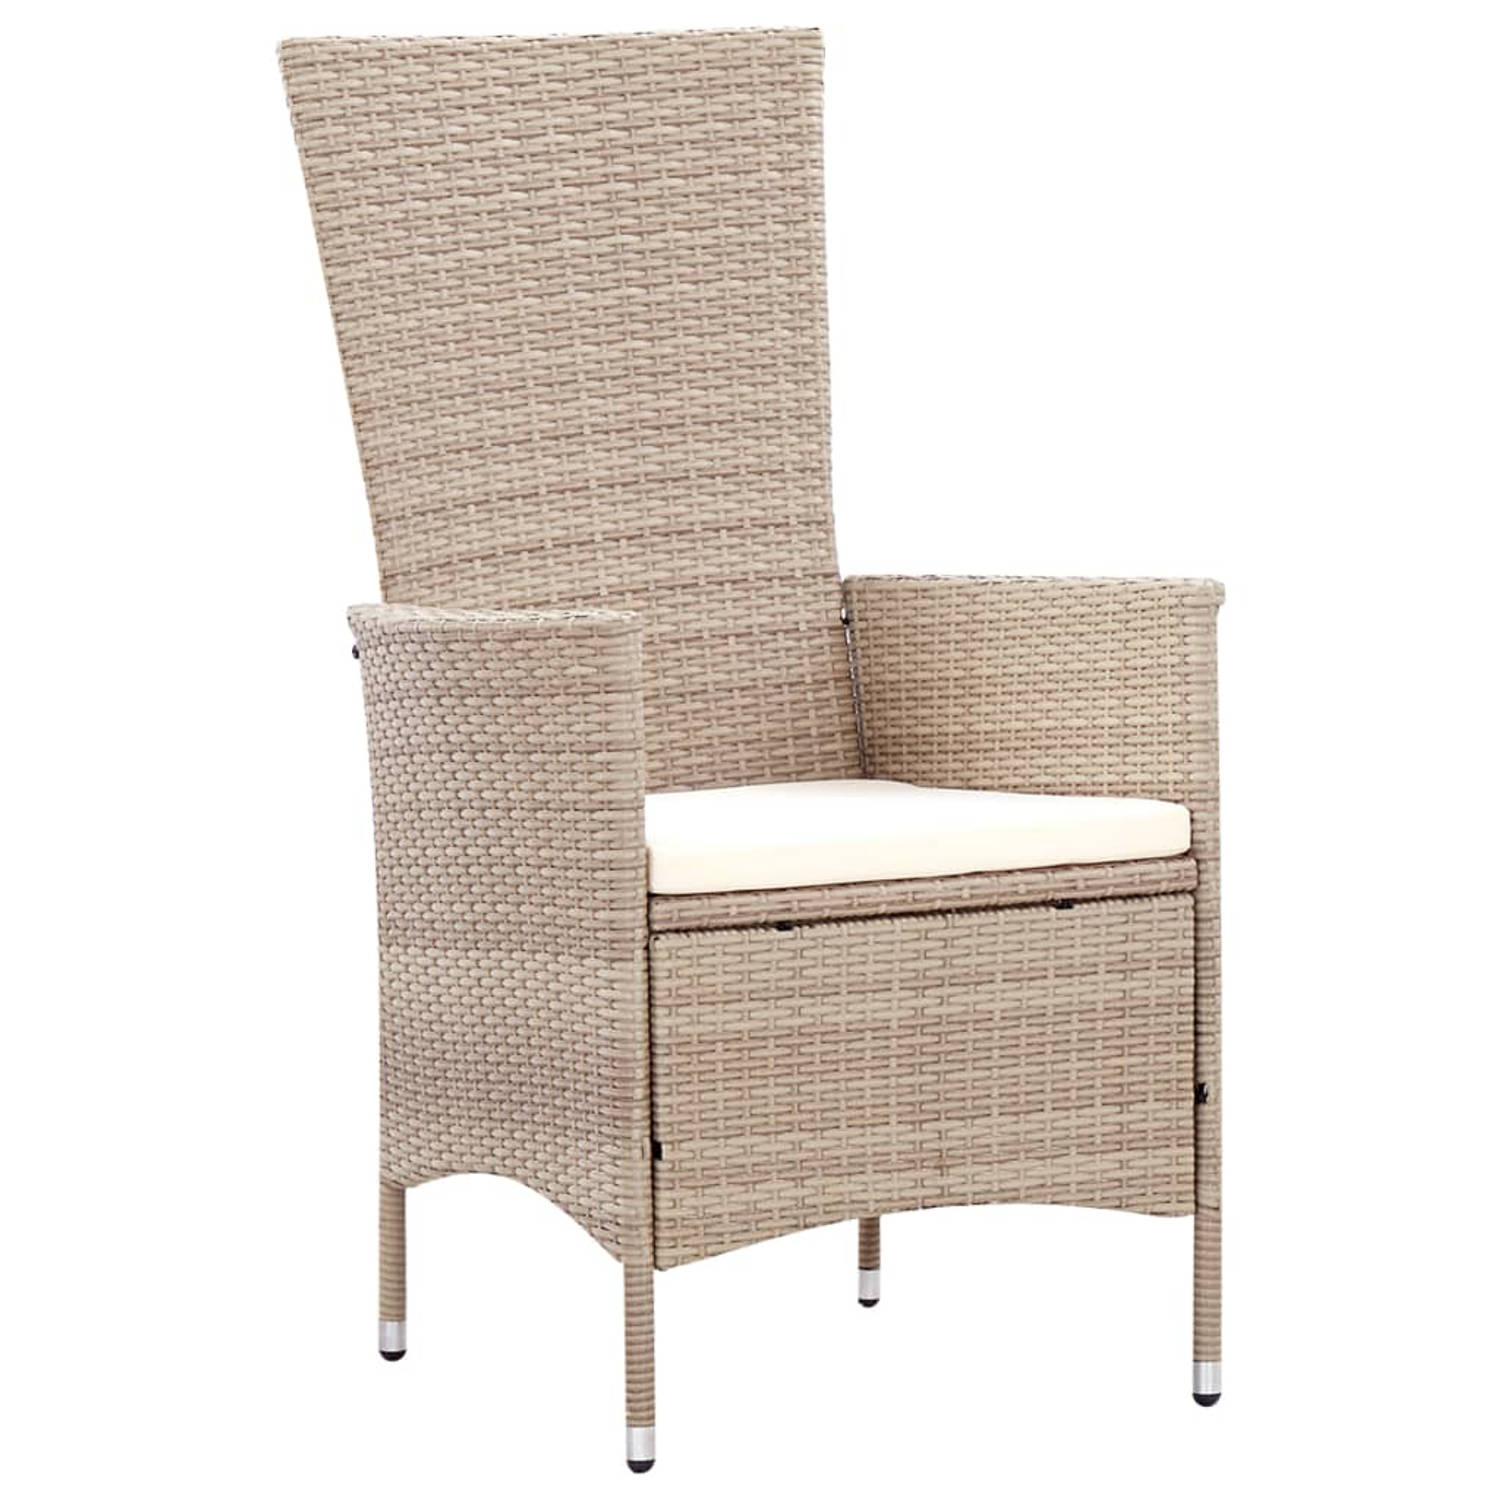 The Living Store 7-delige Tuinset met kussens poly rattan beige - Tuinset